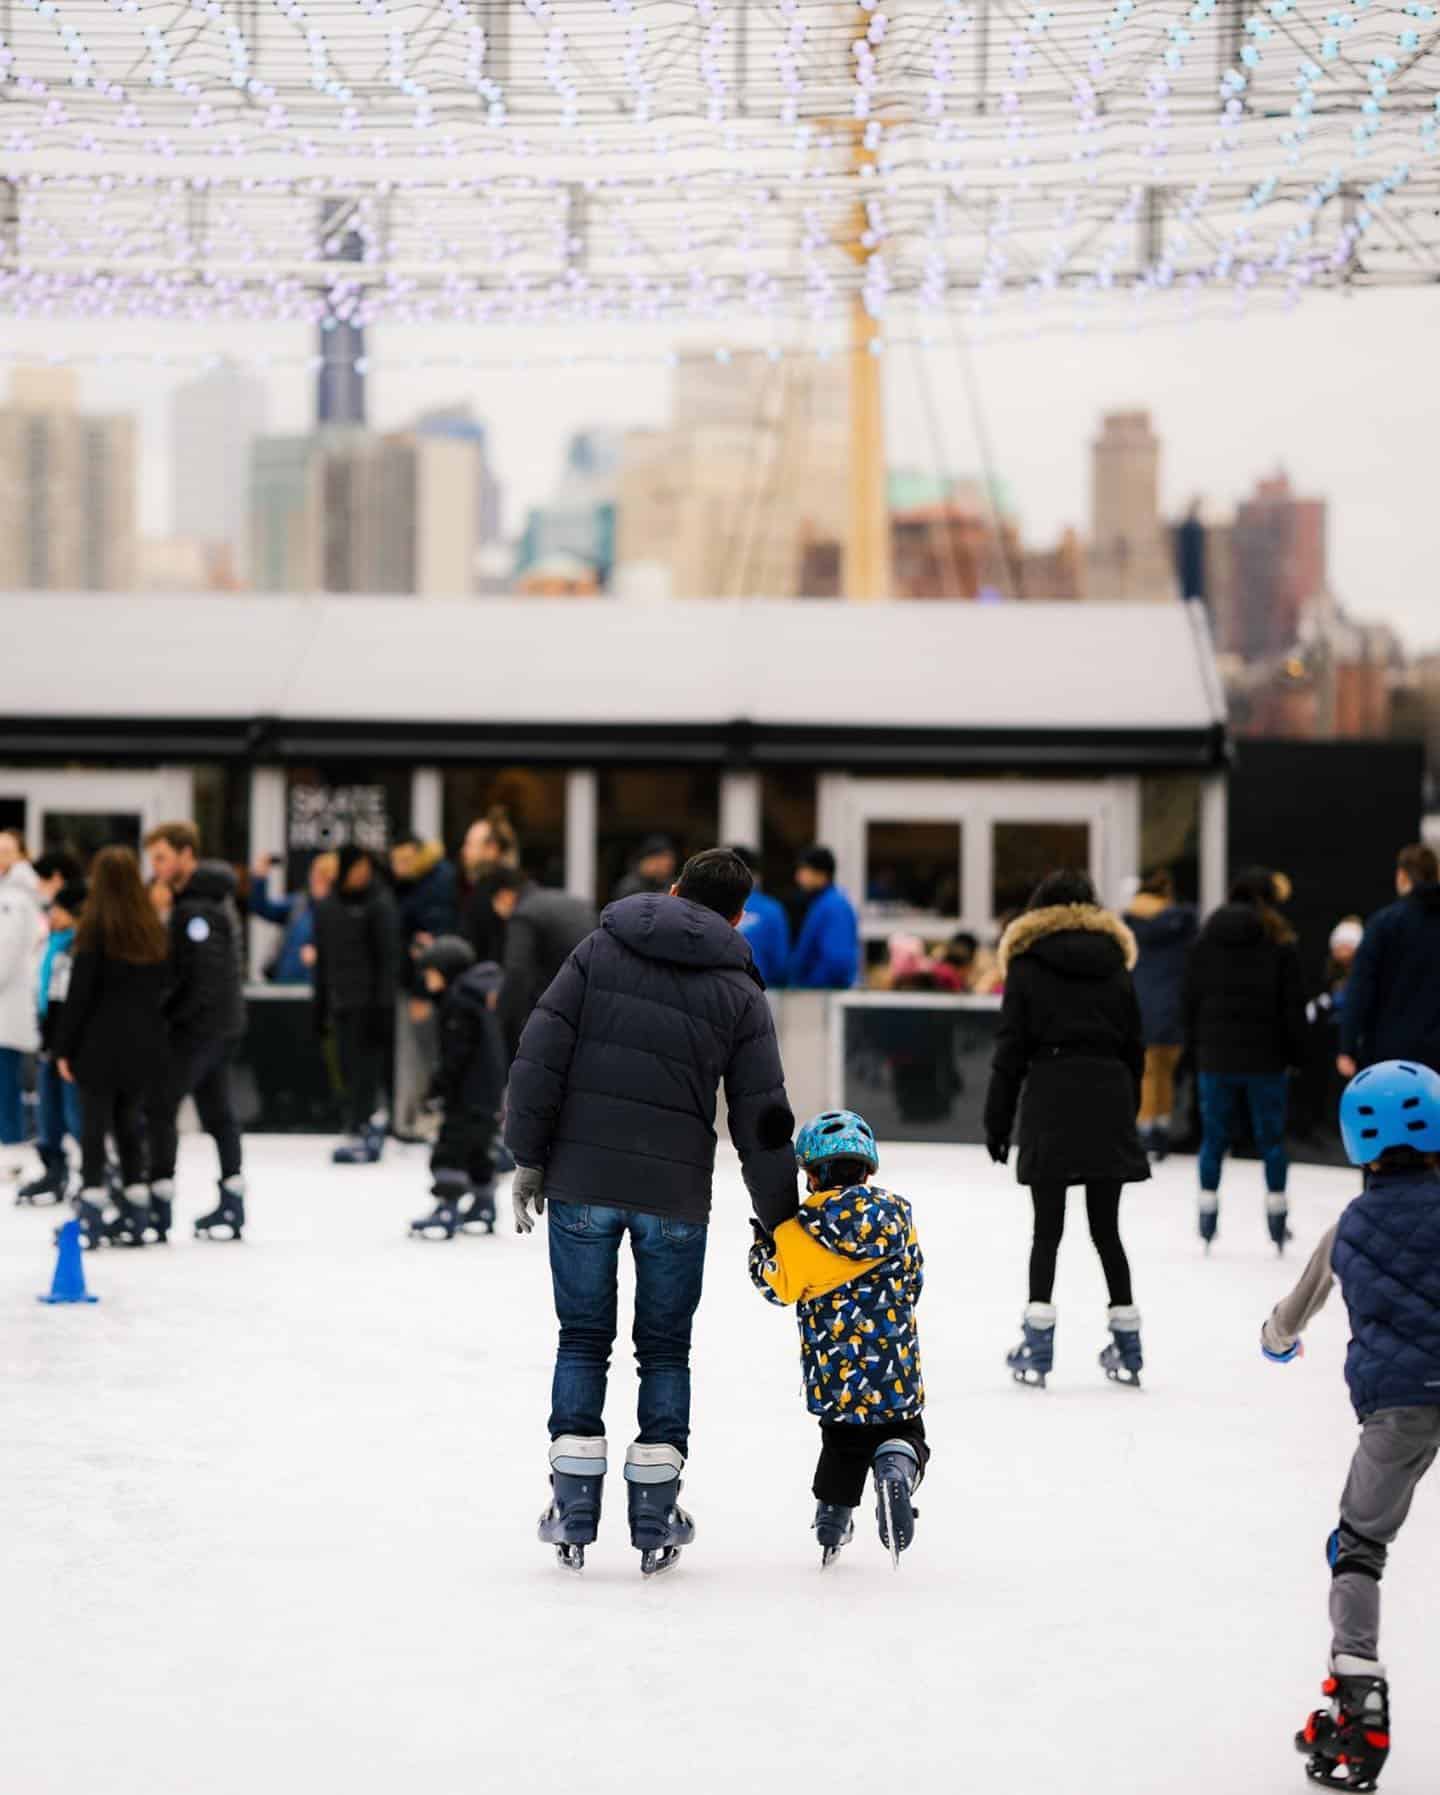 Nineties classics. Live vinyl DJ. Throwback jams. Last chance to skate to the beat ➤ tonight on the ice. Link in bio to book. #TheSeaport